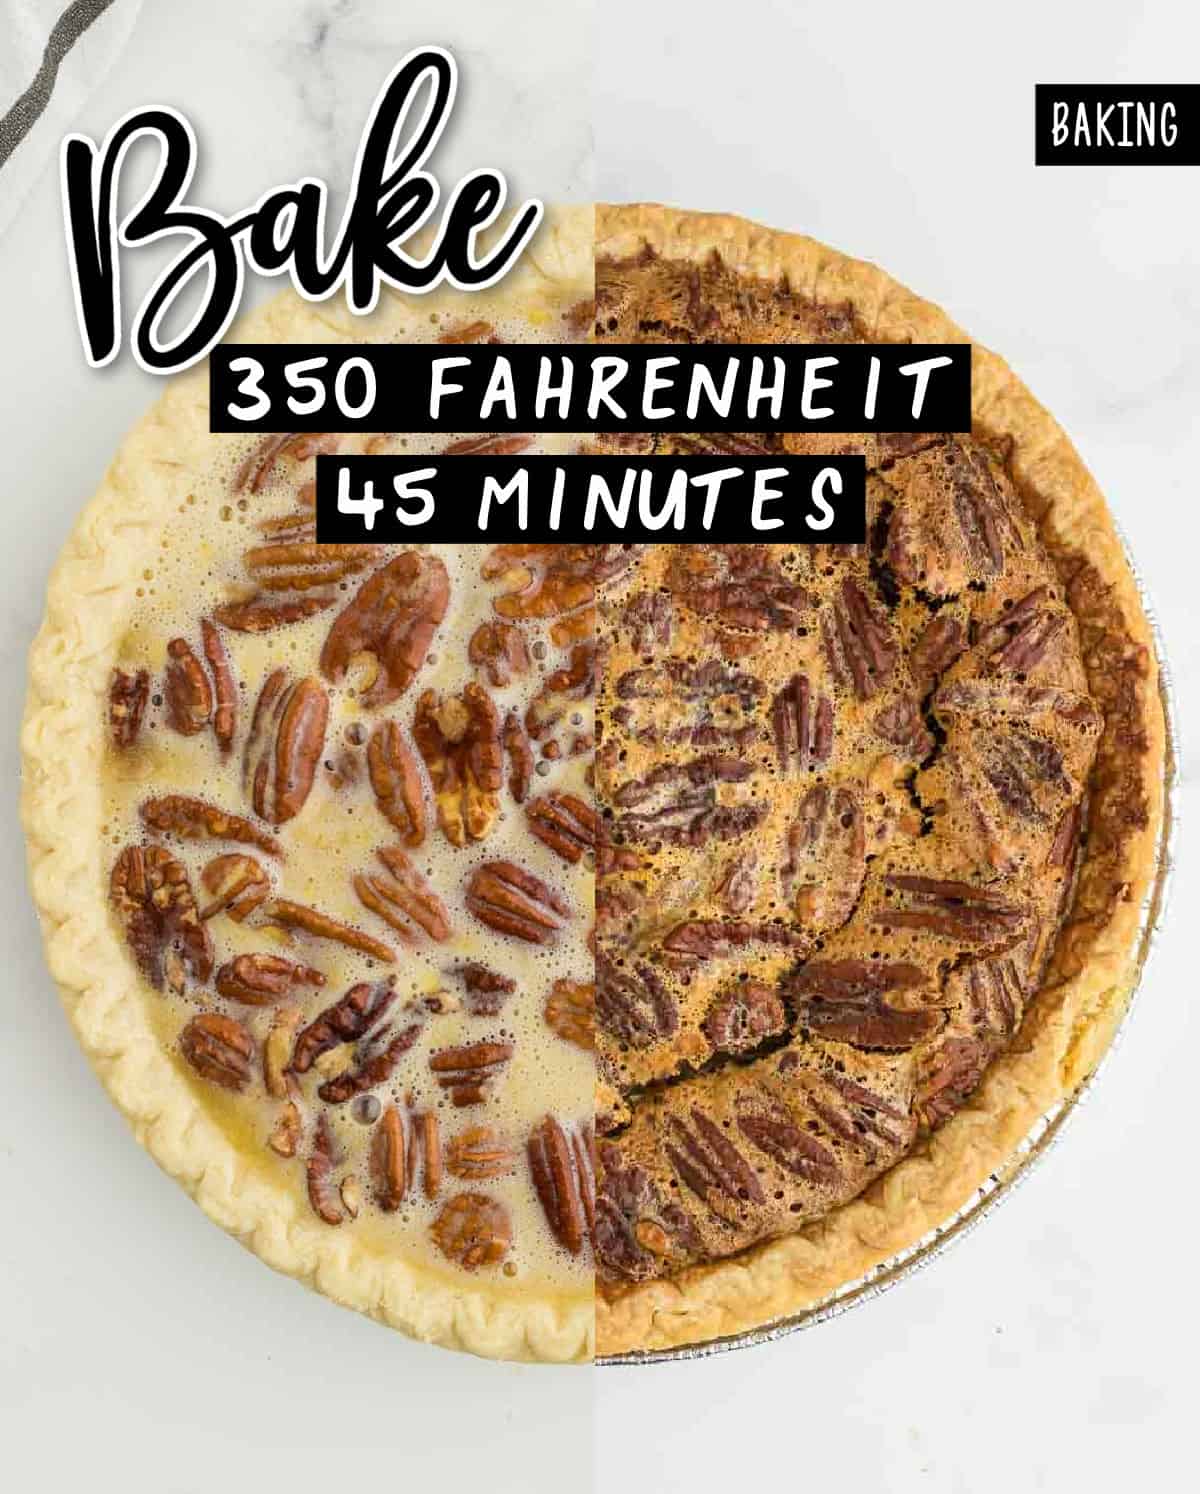 Step: Baking the pie at 350 Fahrenheit for 45 minutes.